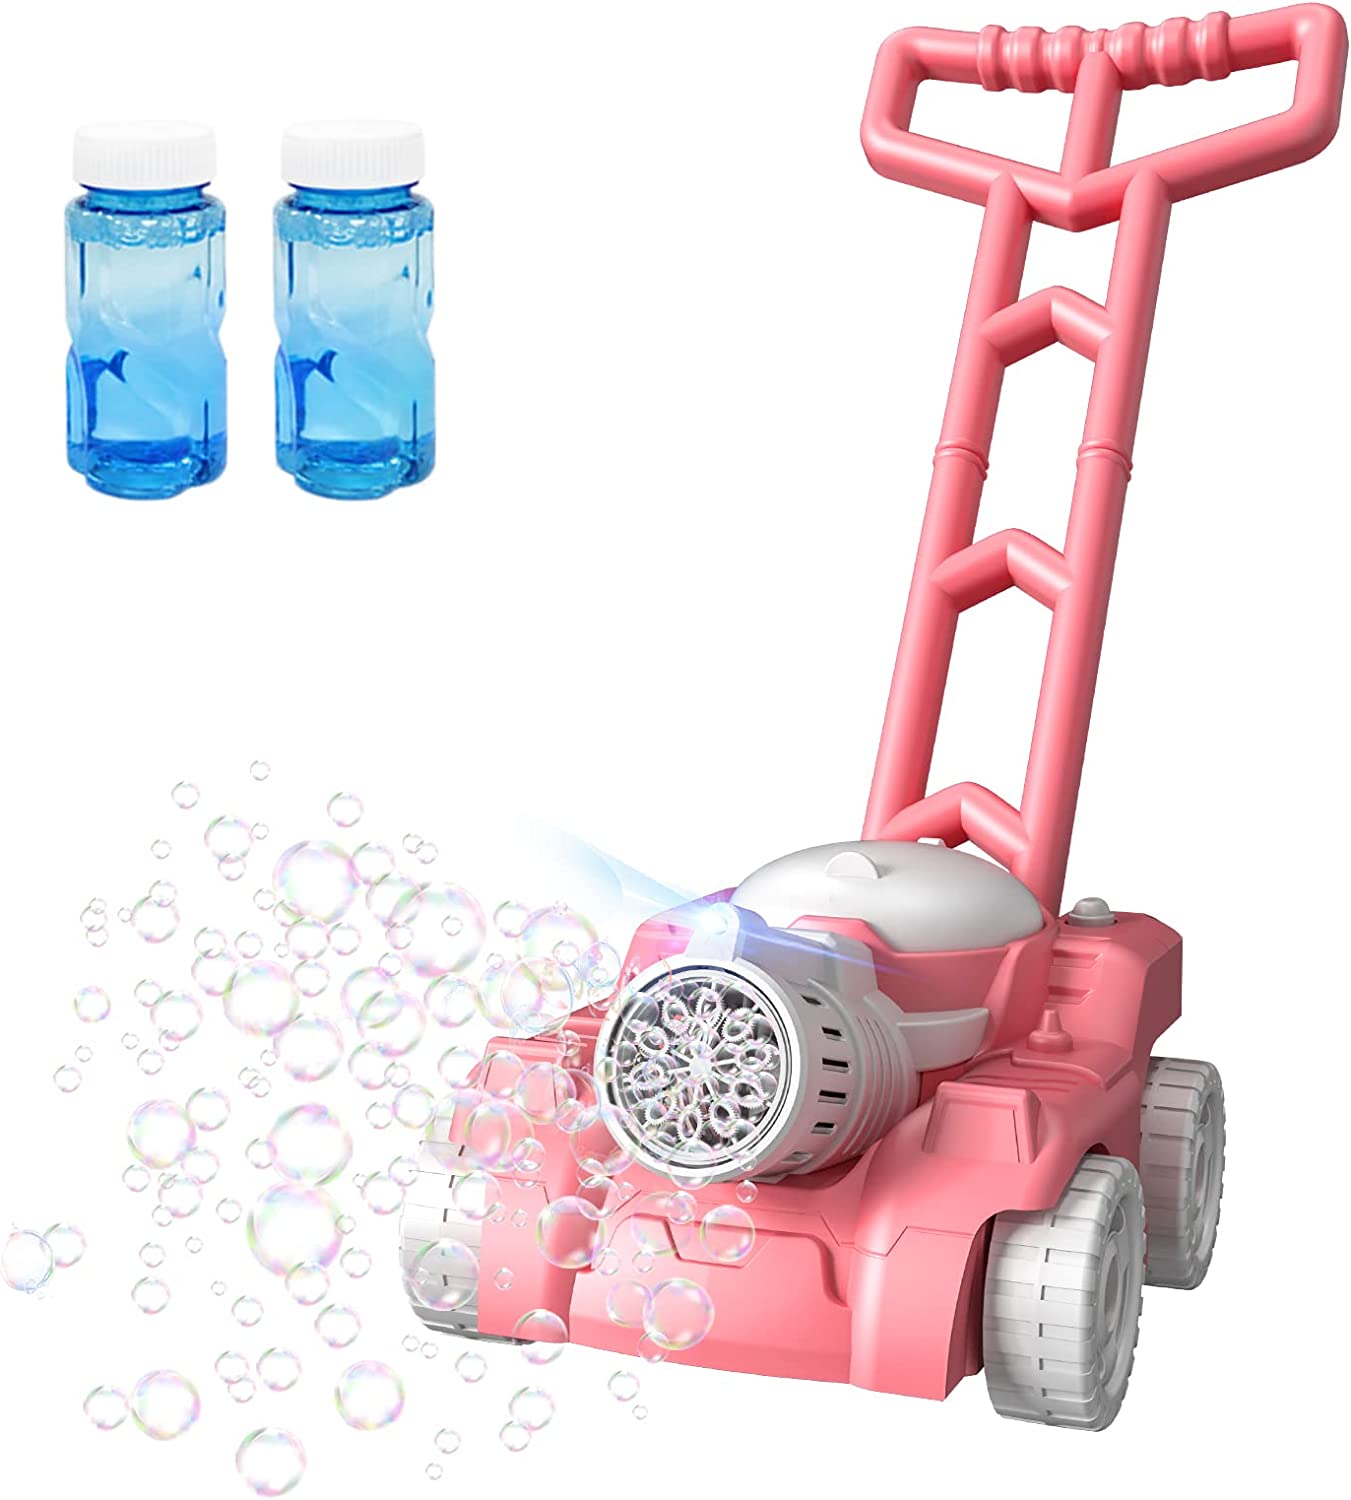 Wisairt Bubble Lawn Mower,Bubble Machine for Kids Toddlers, Baby Kids Lawn Mower Toy,Outdoor Garden Push Toy Bubble Toys Birthday Gift for Preschool Boy or Girl 3+